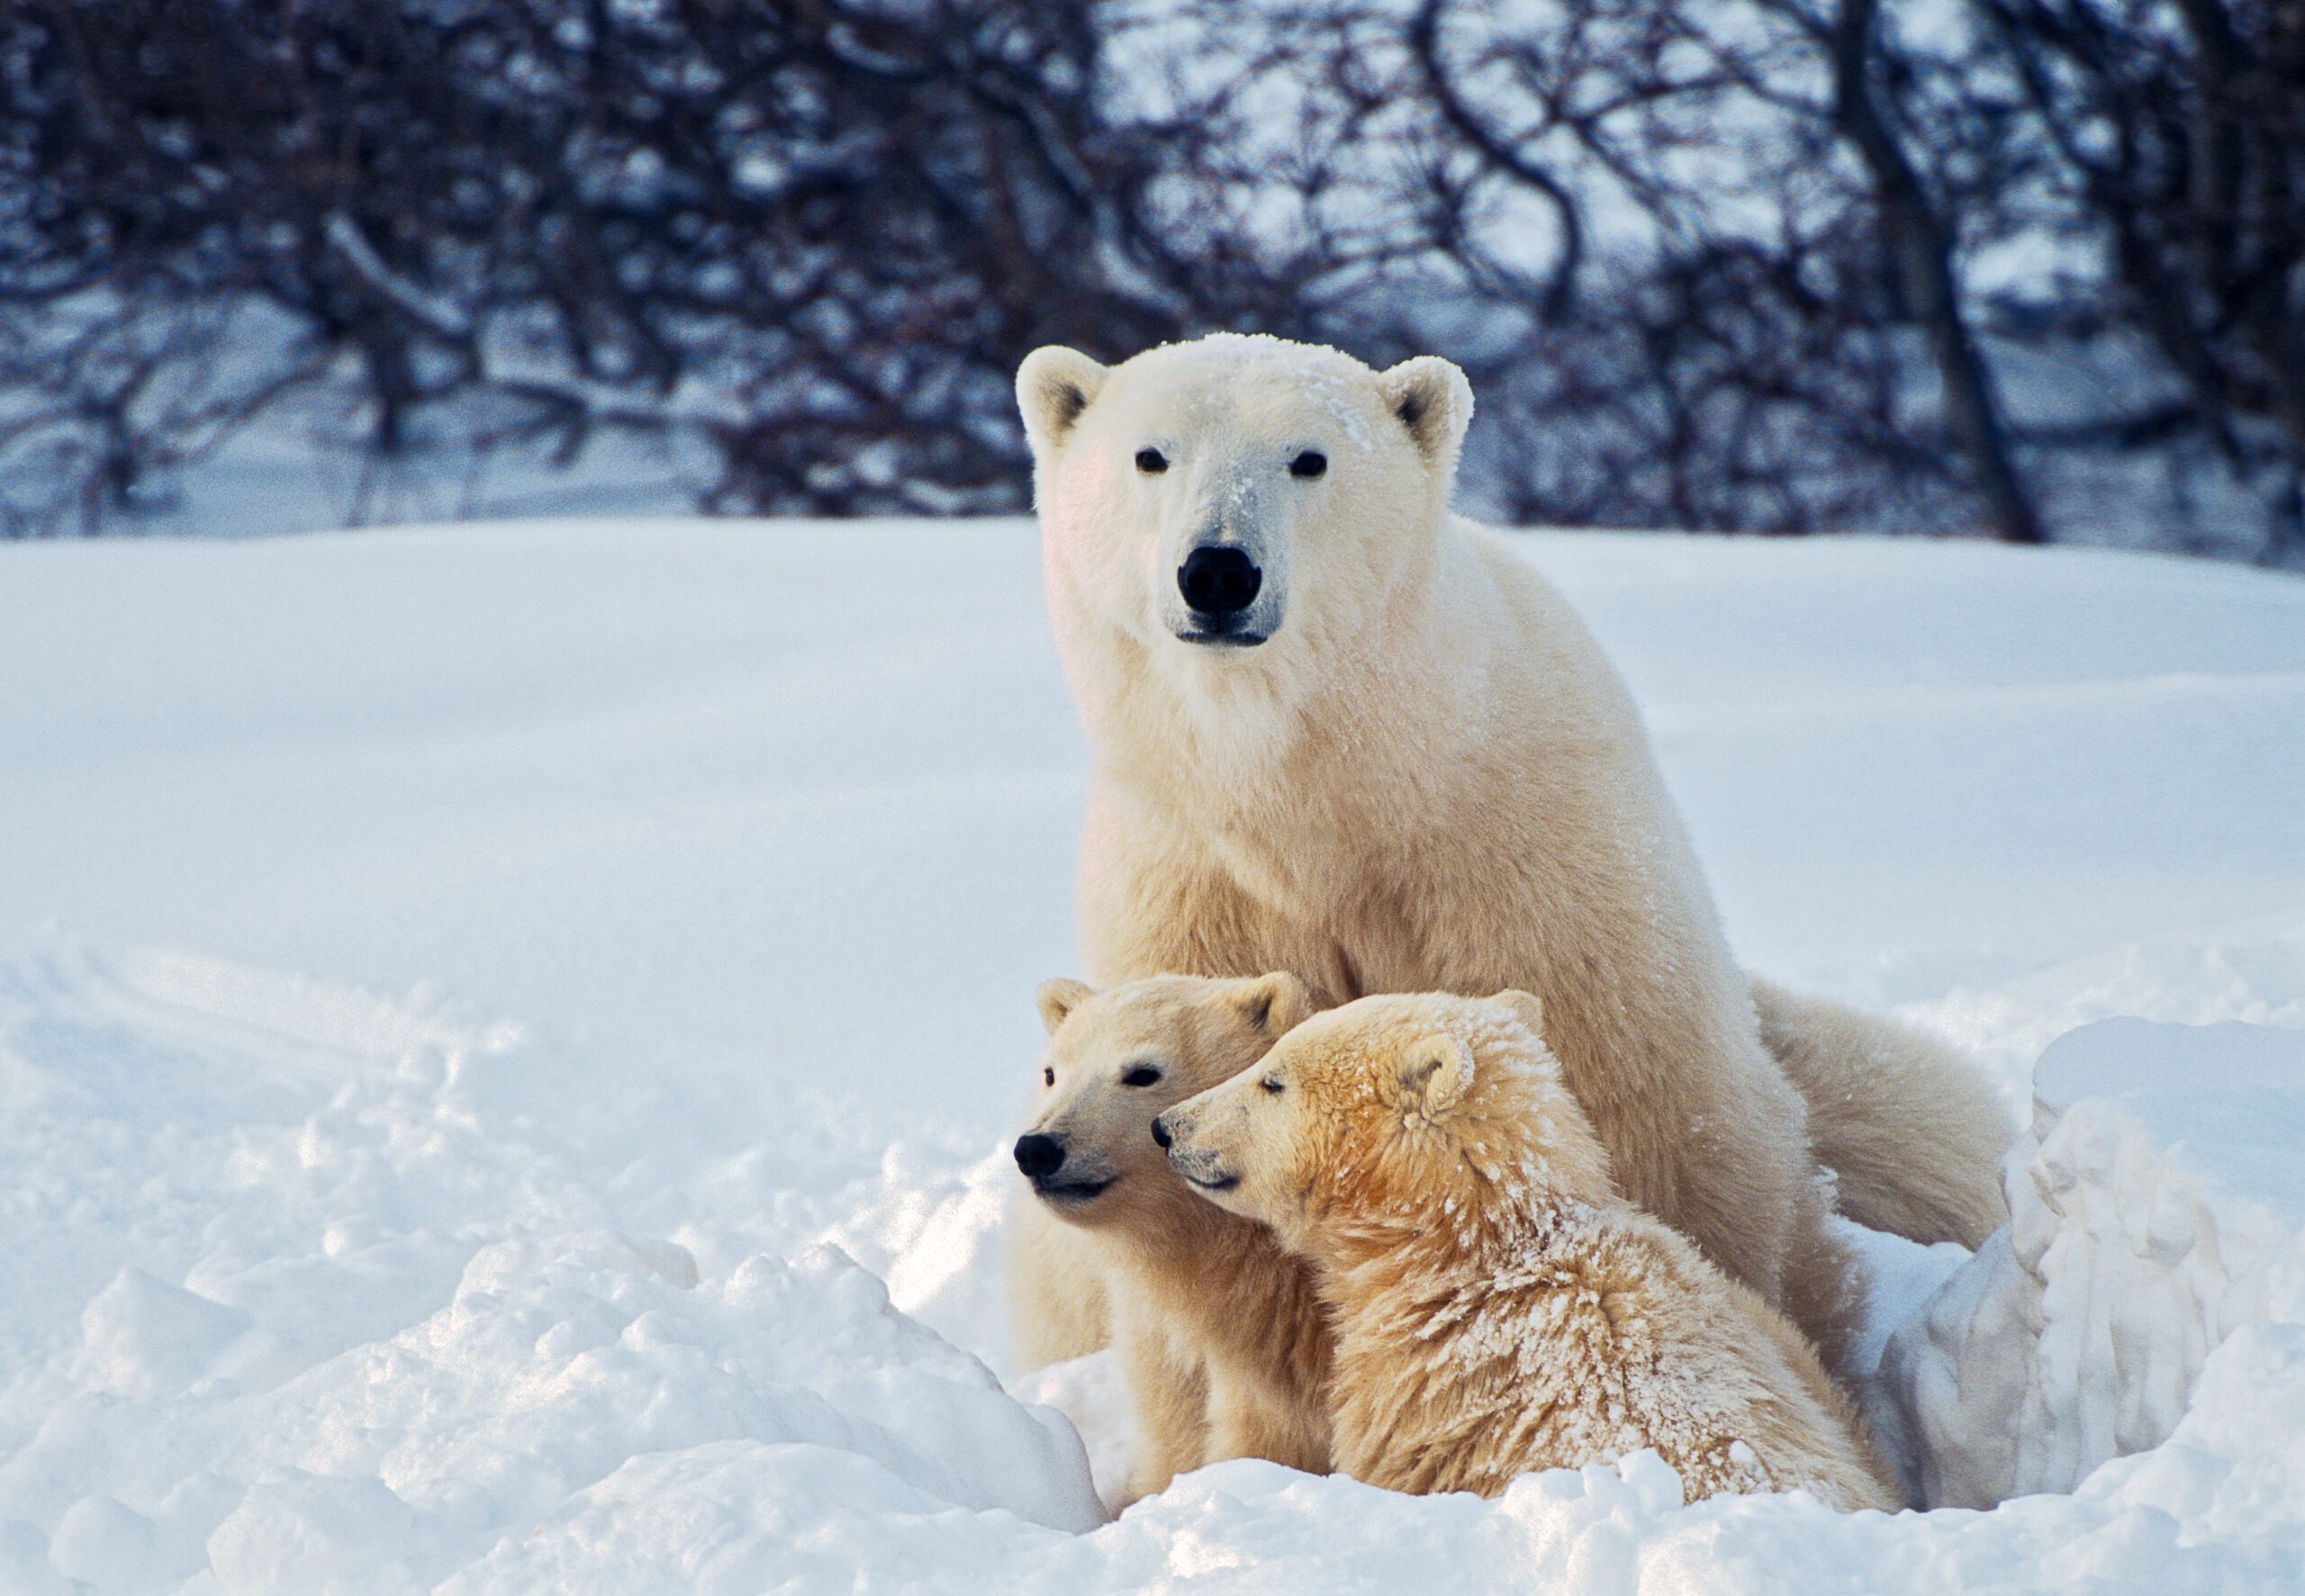 A polar bear sitting in a snowbank with its two cubs